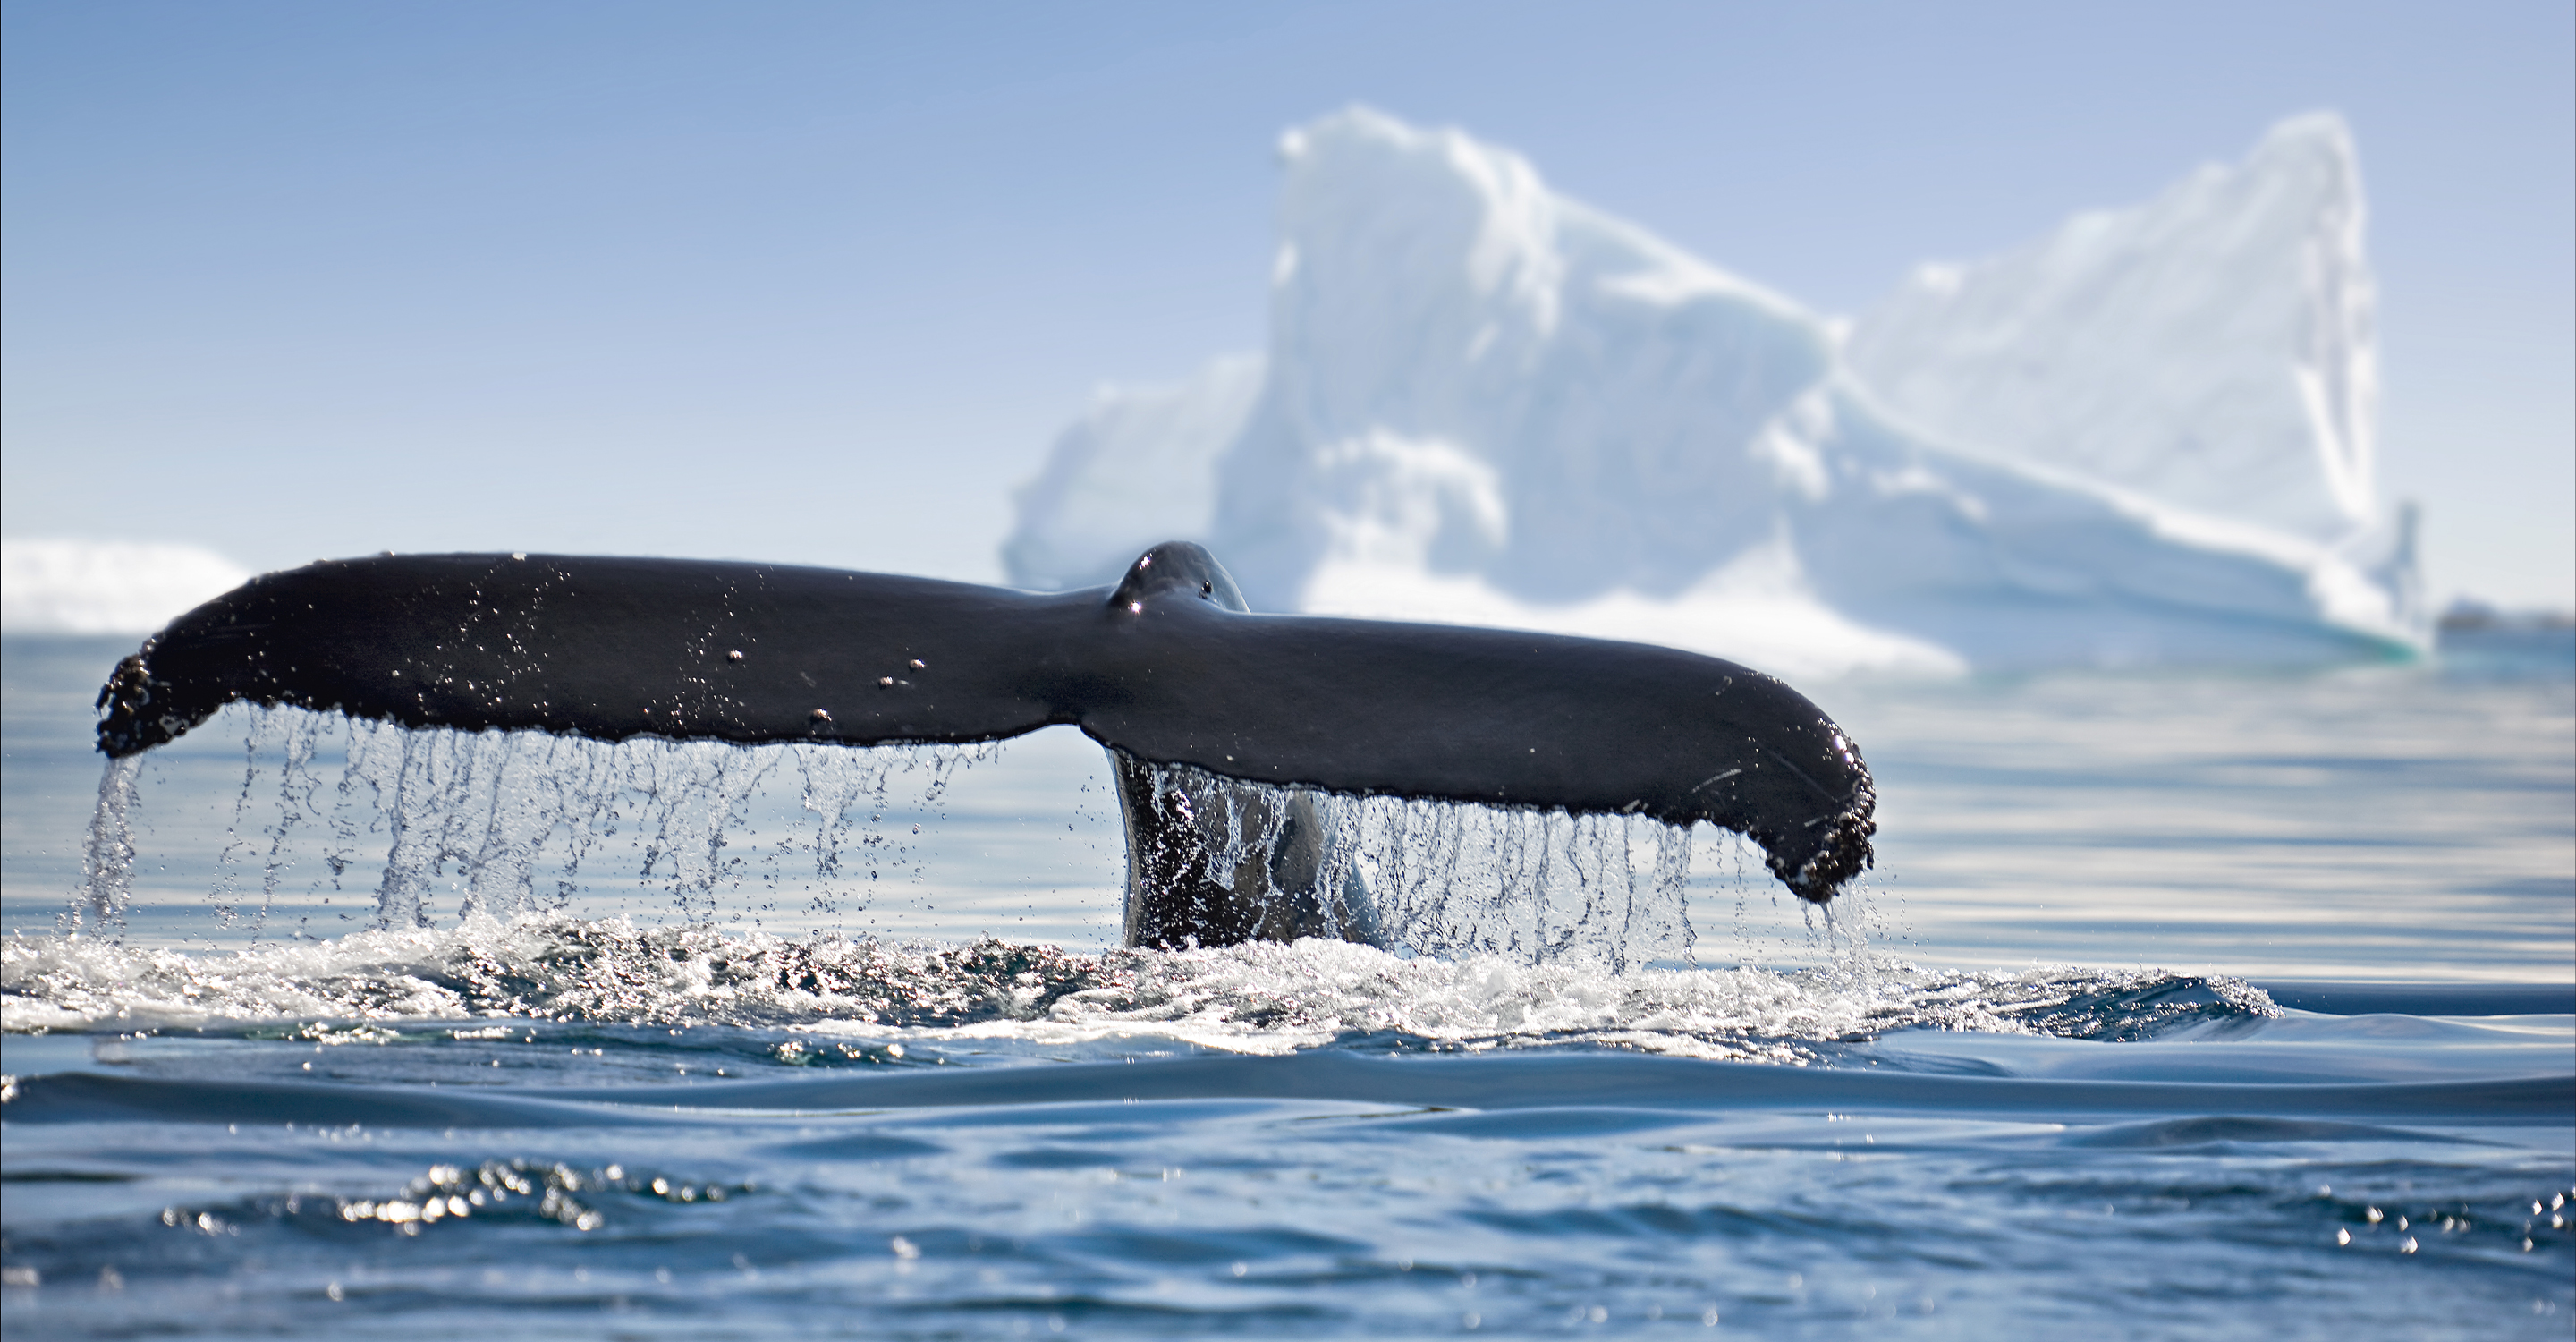 A whale fluke emerges from the water in Antarctica